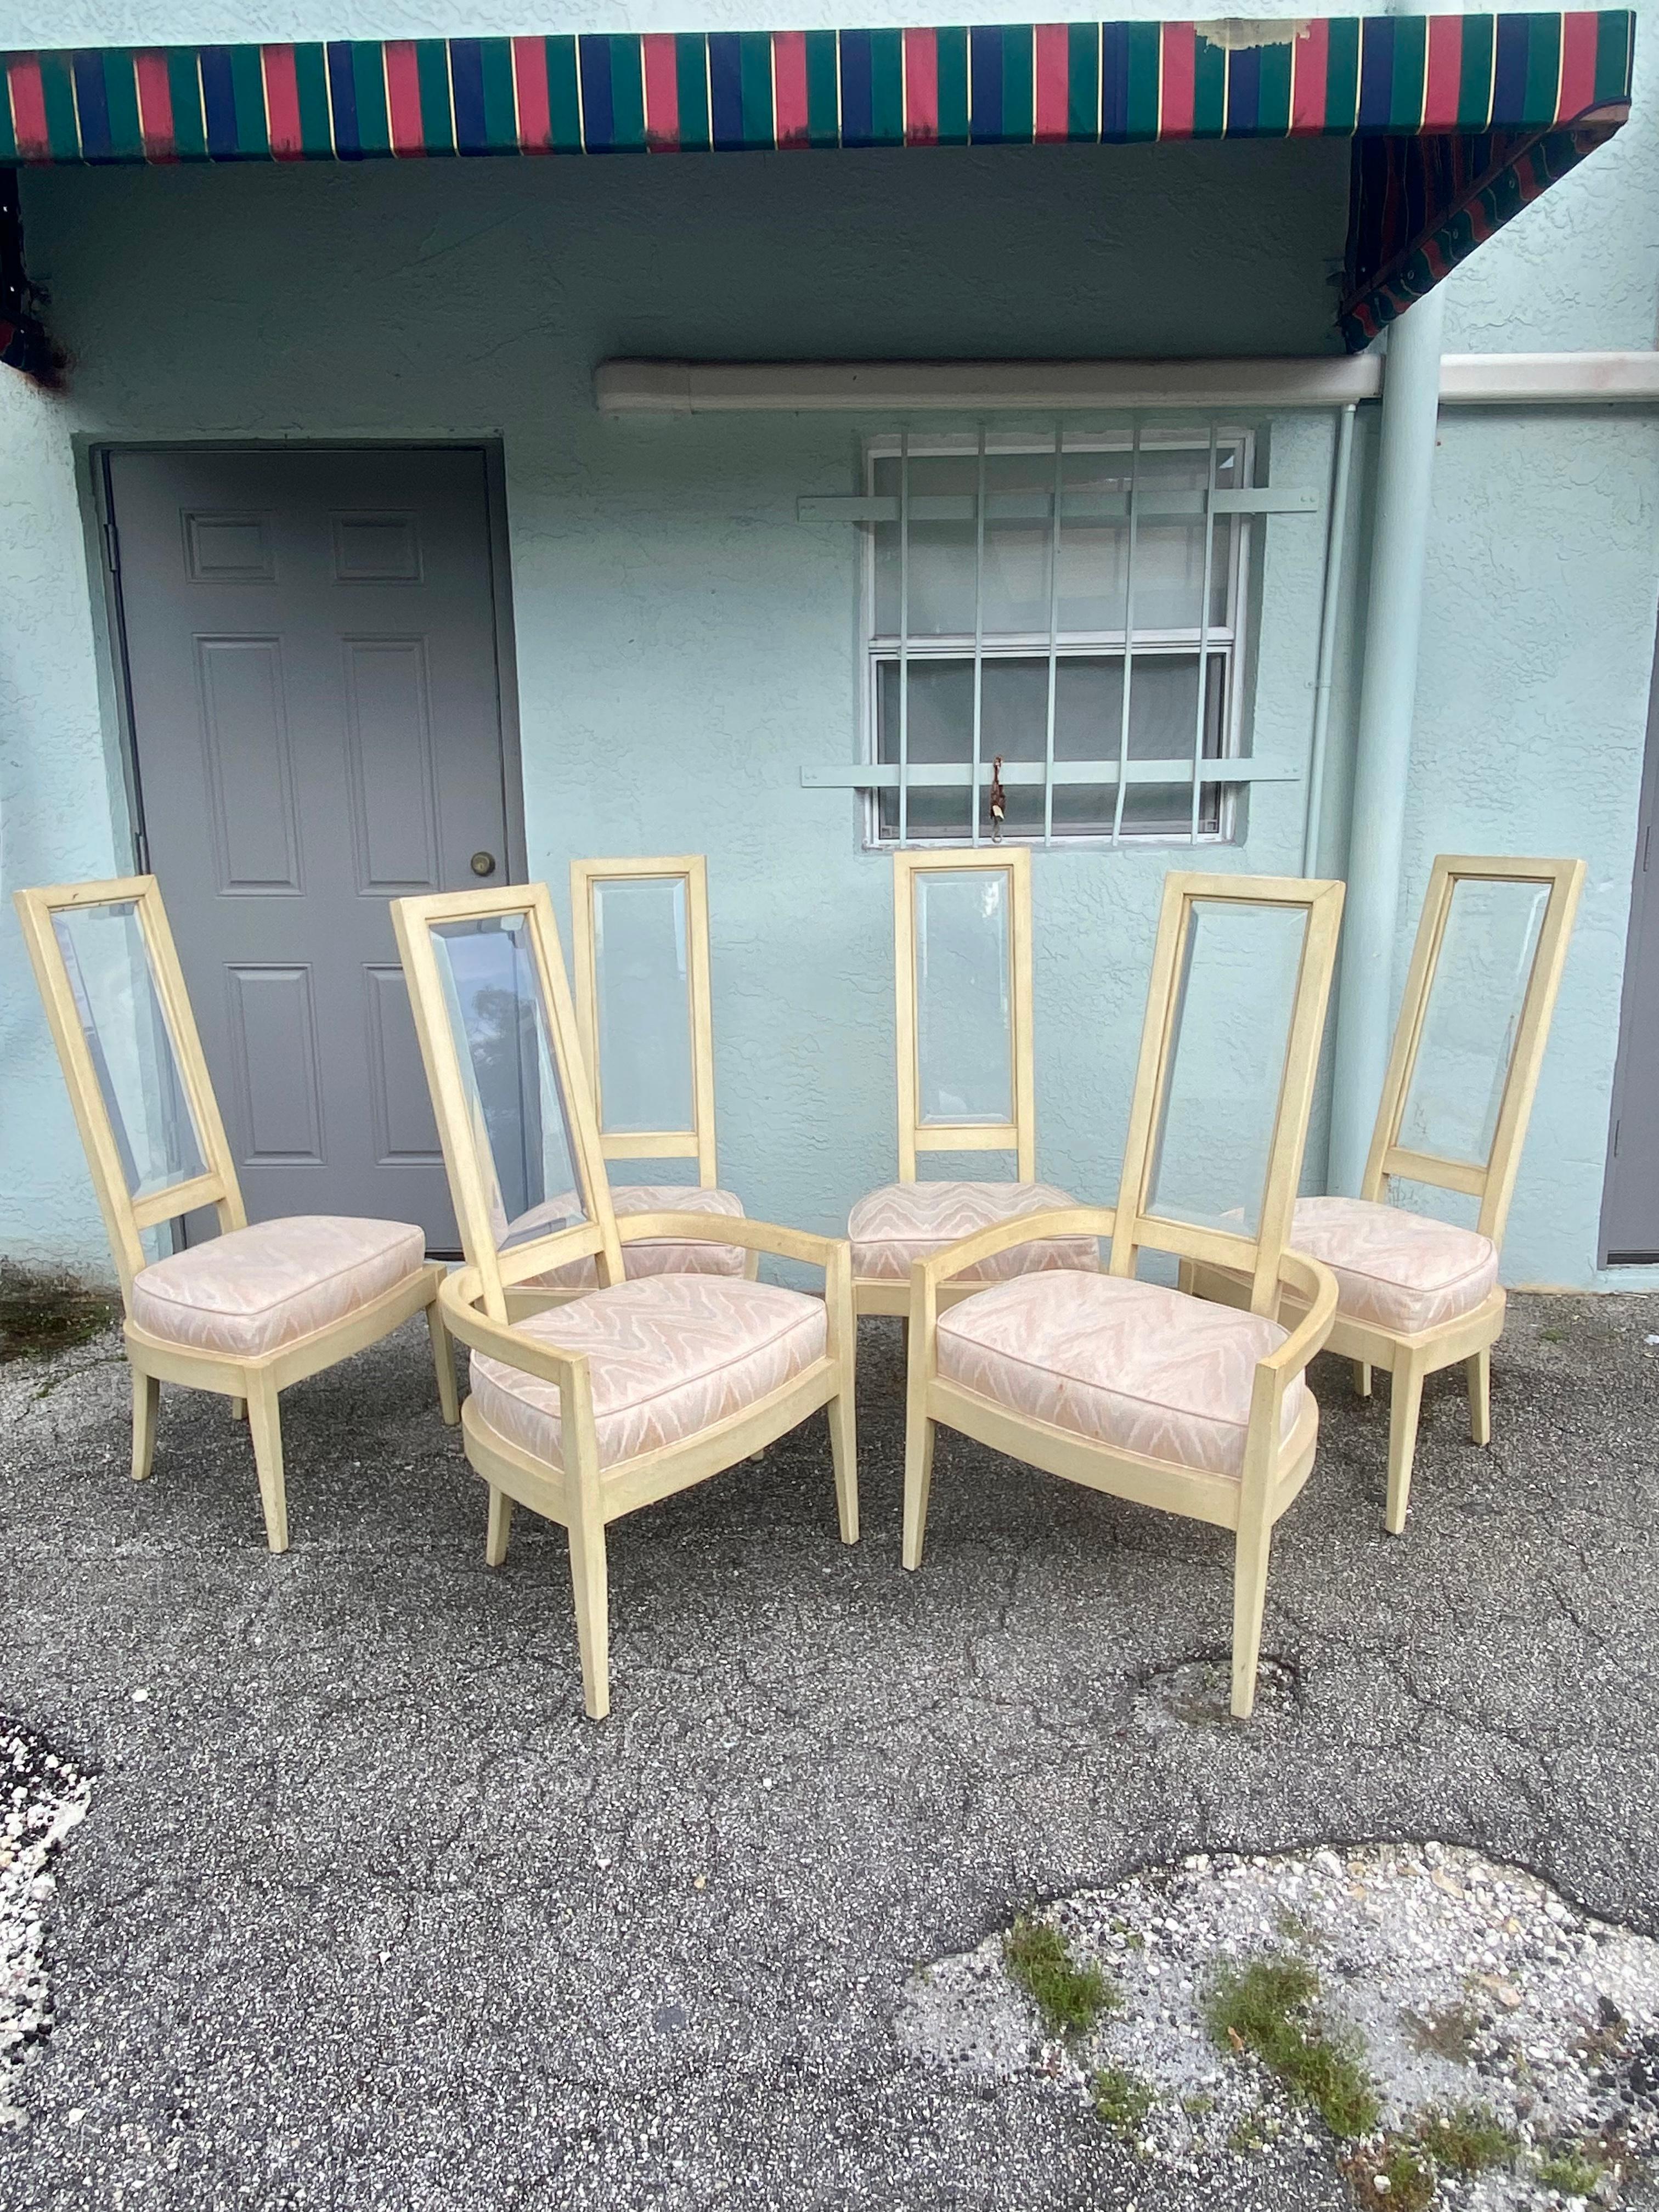 On offer on this occasion is one of the most stunning, Lucite backs and beige wood chairs you could hope to find. This is an ultra-rare opportunity to acquire what is, unequivocally, the best of the best, it being a most spectacular and